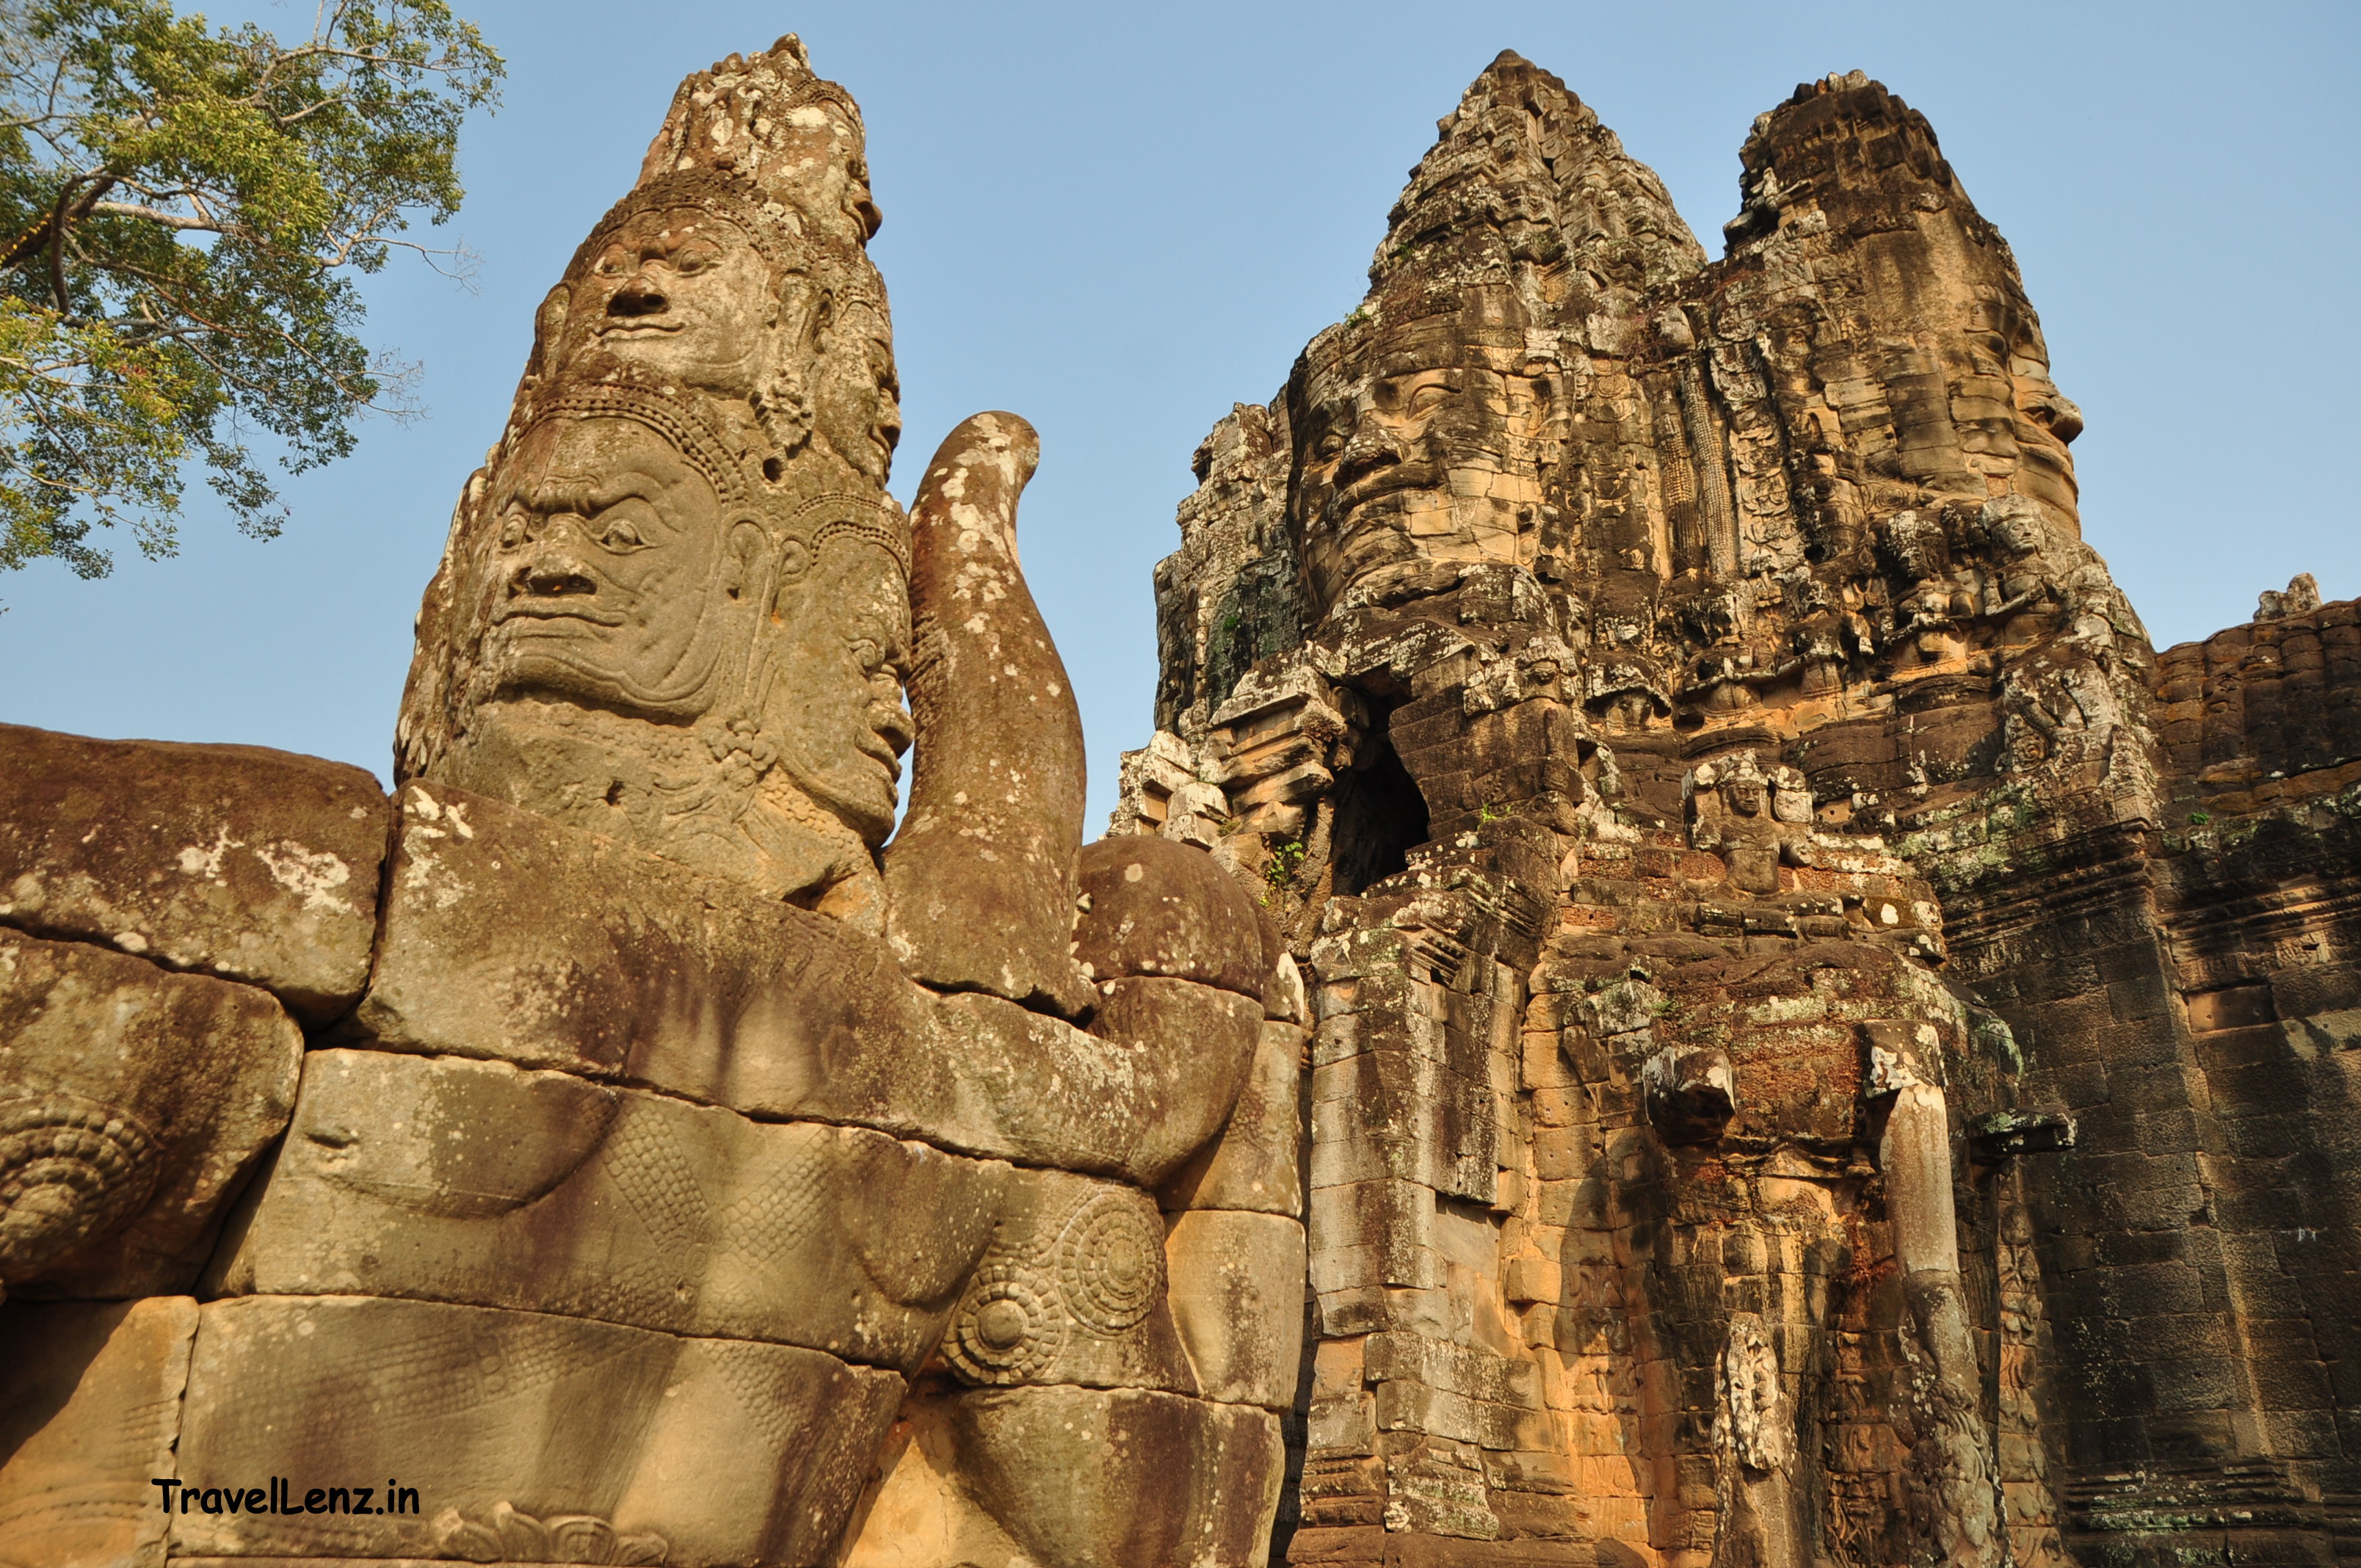 South gate tower of Angkor Thom